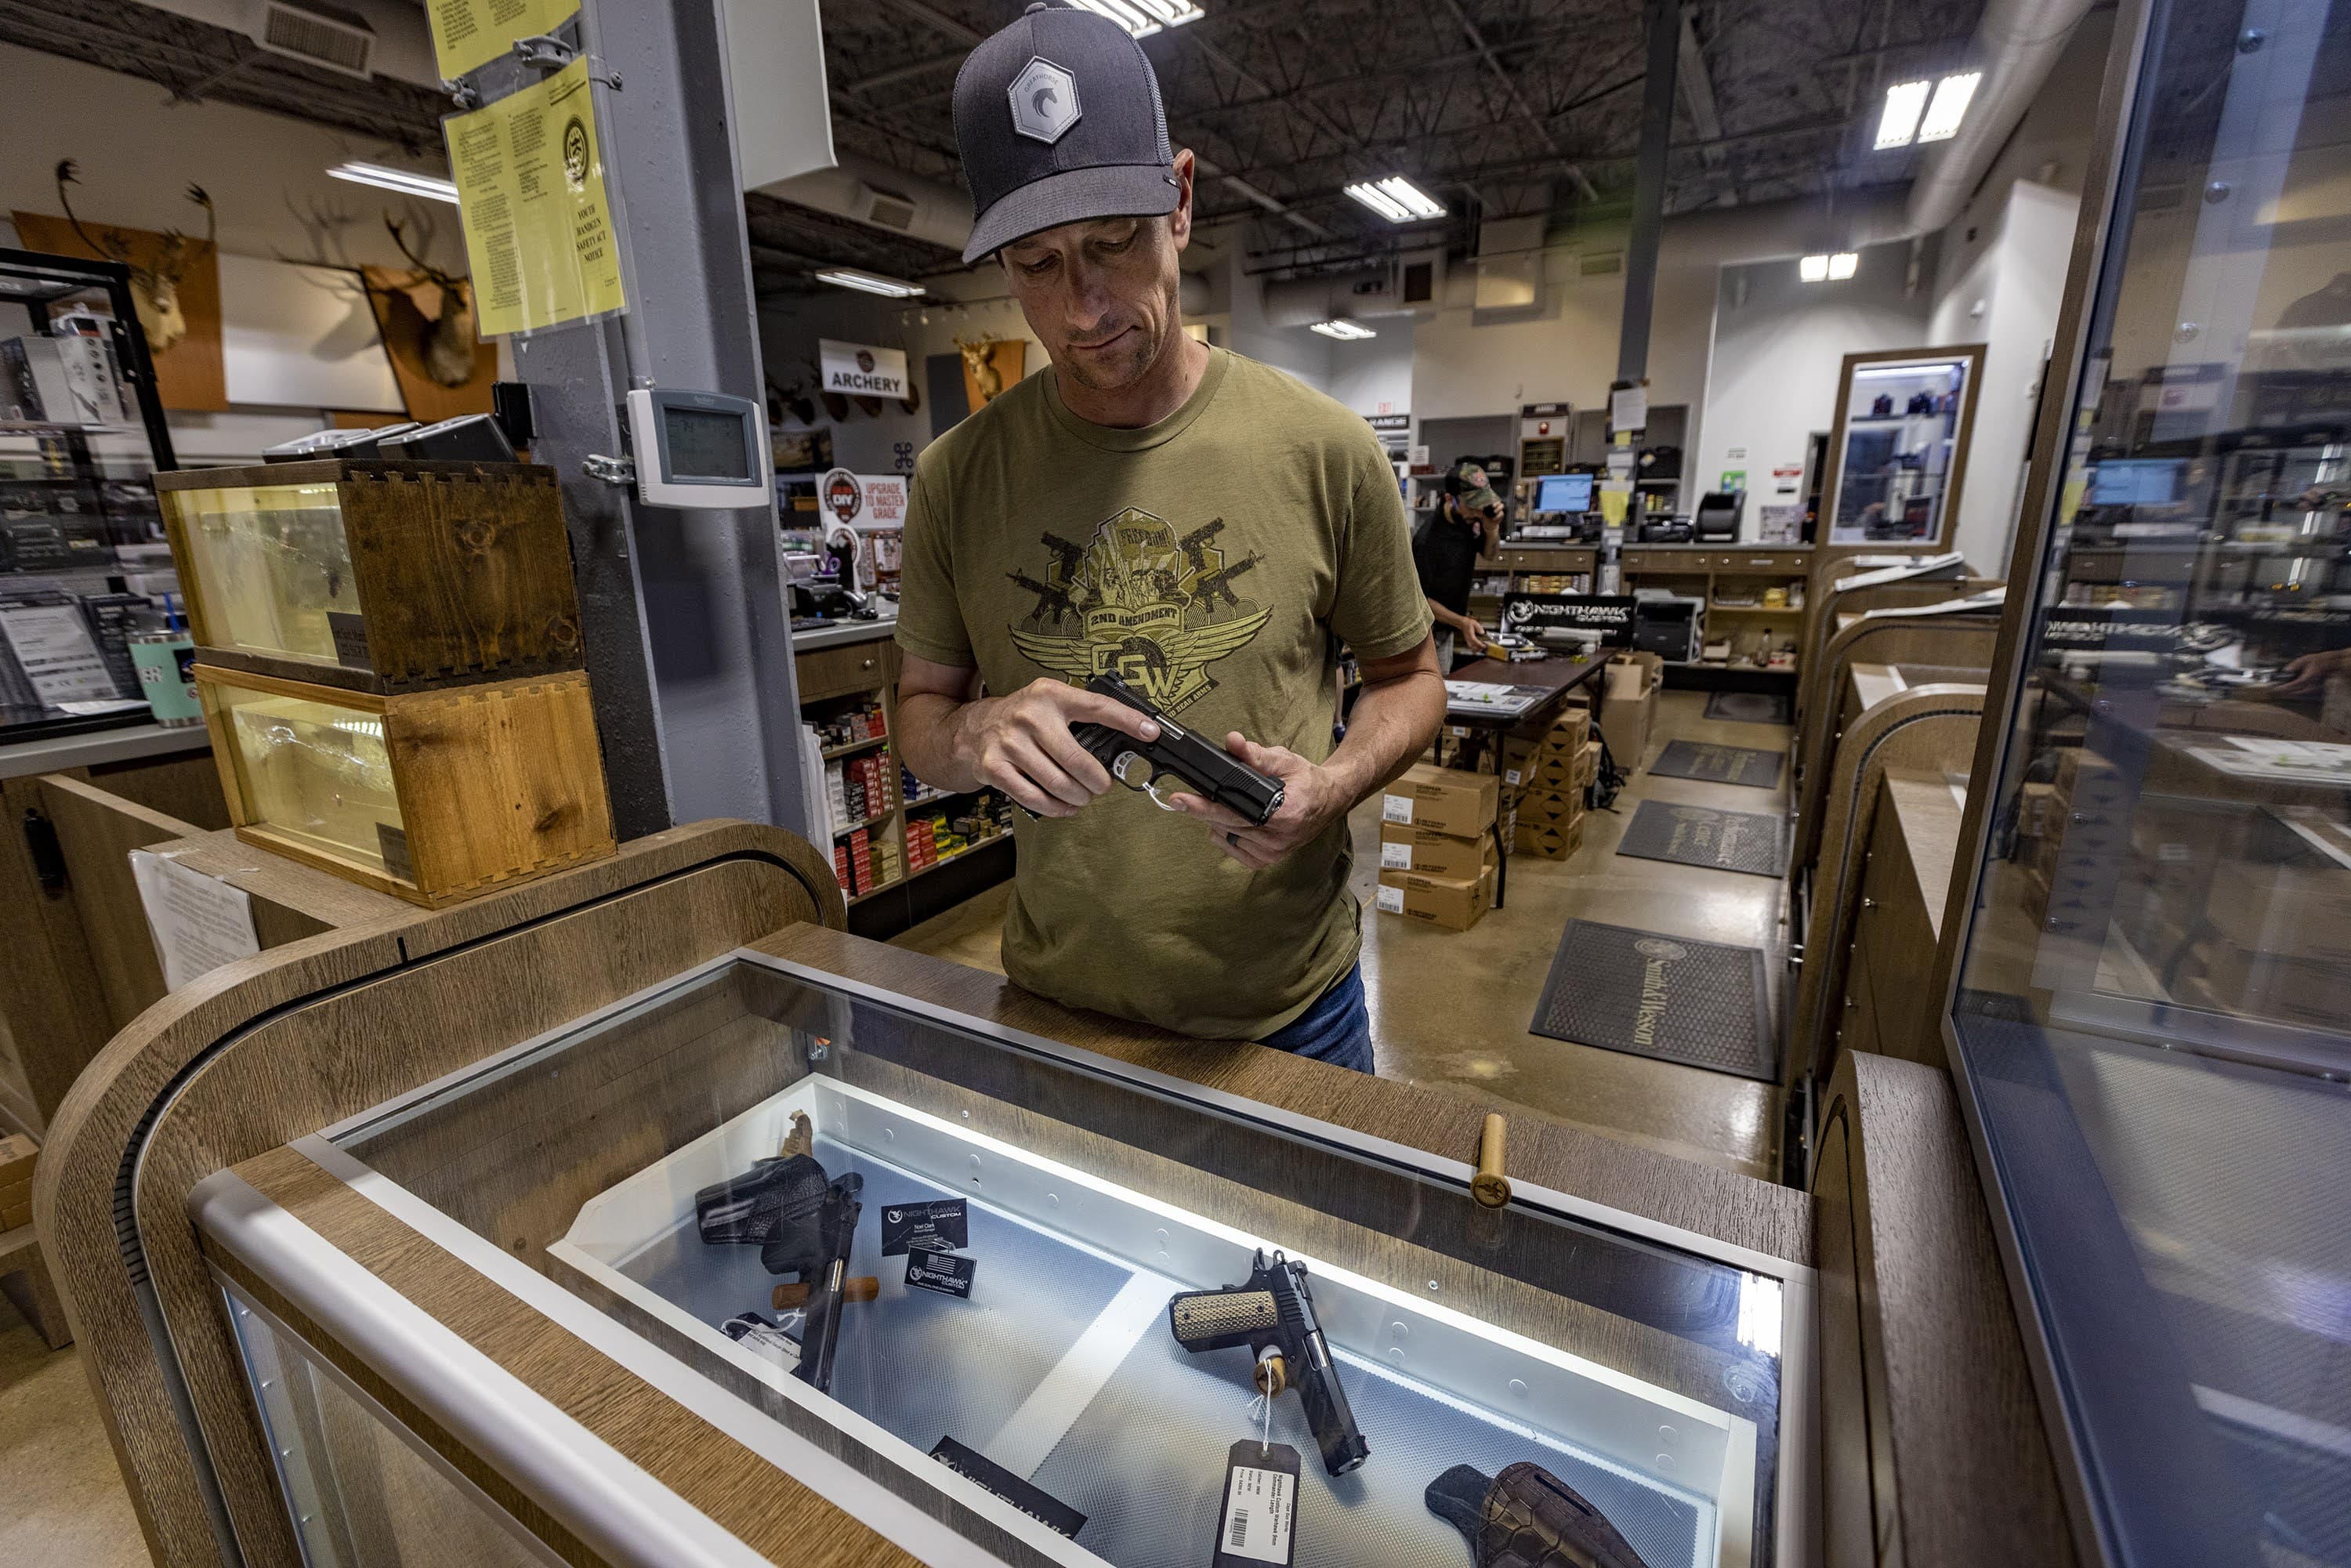 Toby Leary shows a handgun from the showroom cabinet at Cape Gun Works in Hyannis. (Jesse Costa/WBUR)